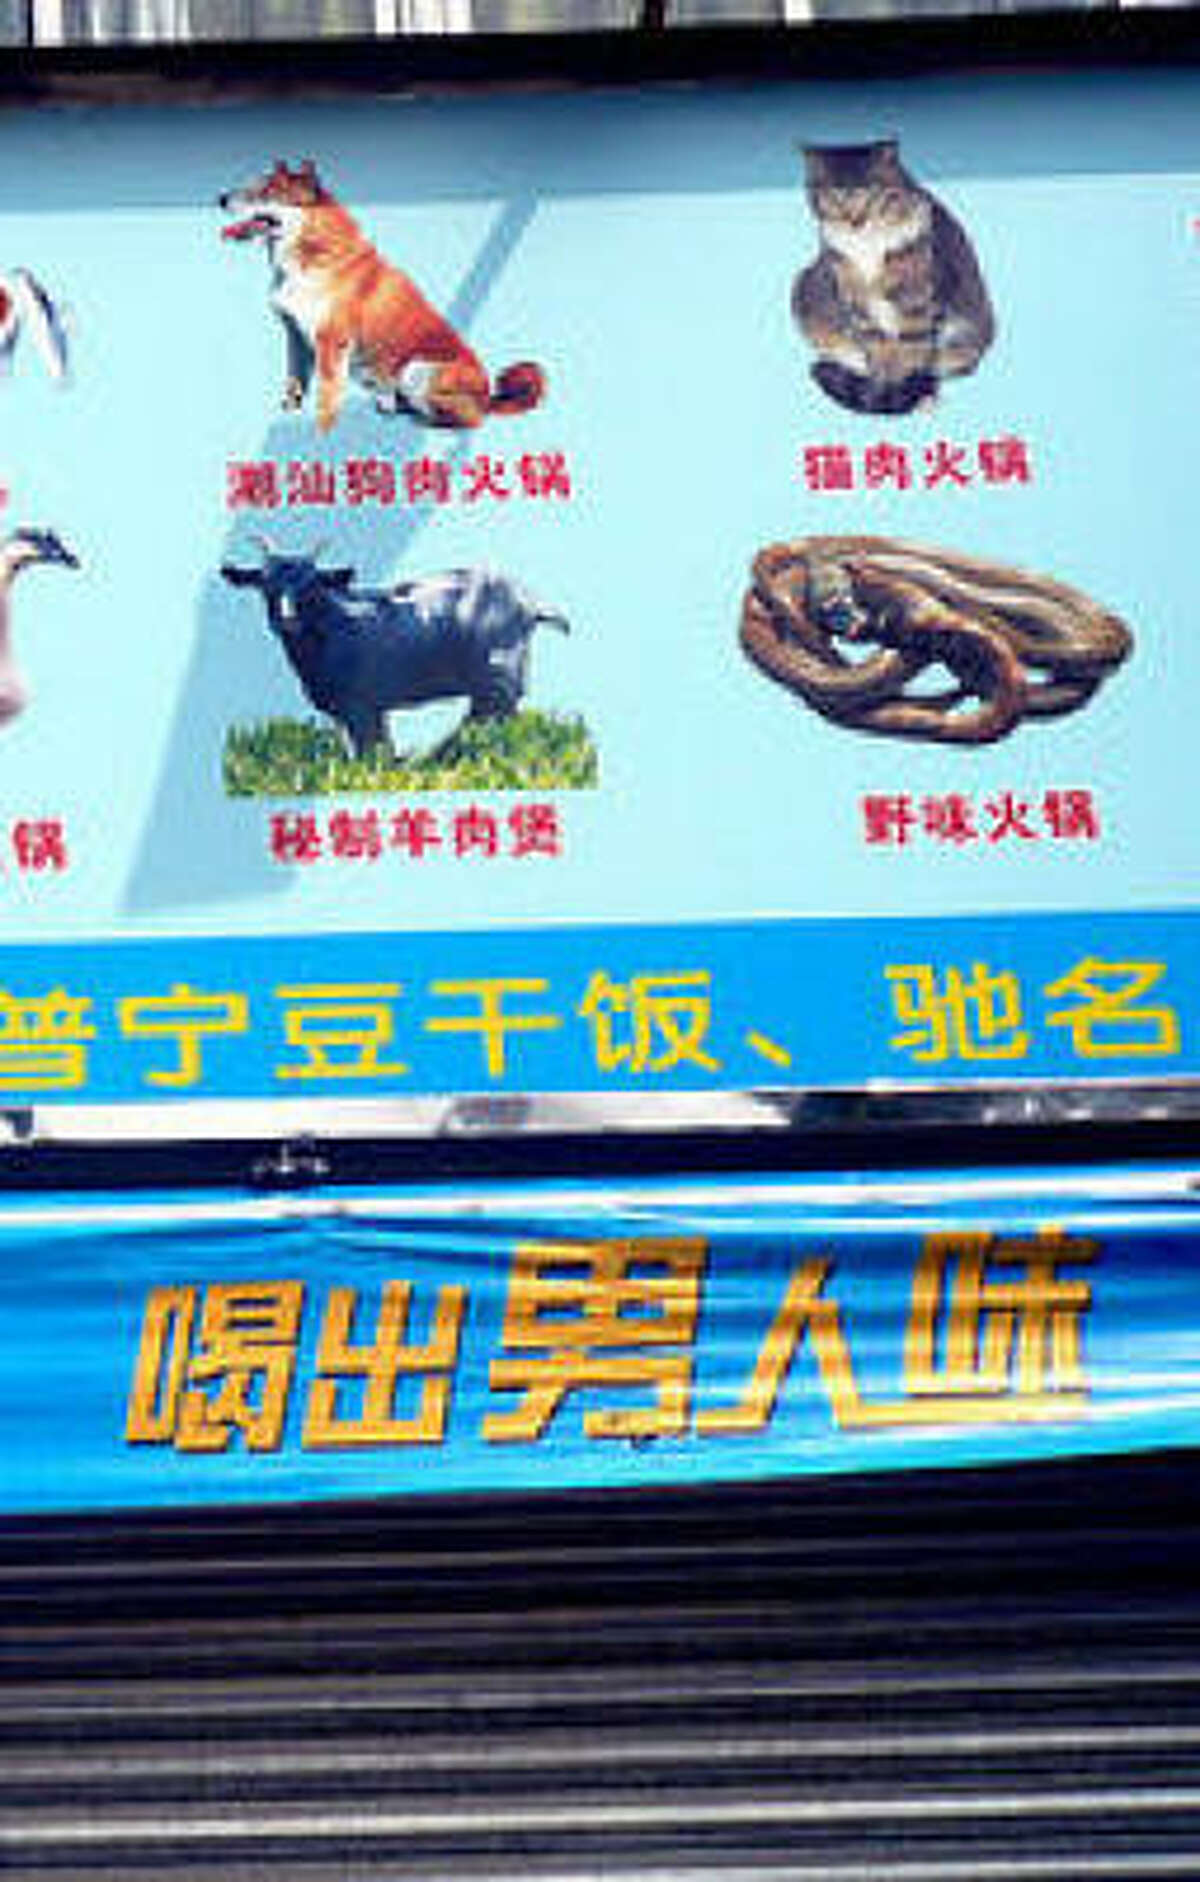 Menu selections in Shenzen, China. (Photo from Gruntzooki on Flickr.)